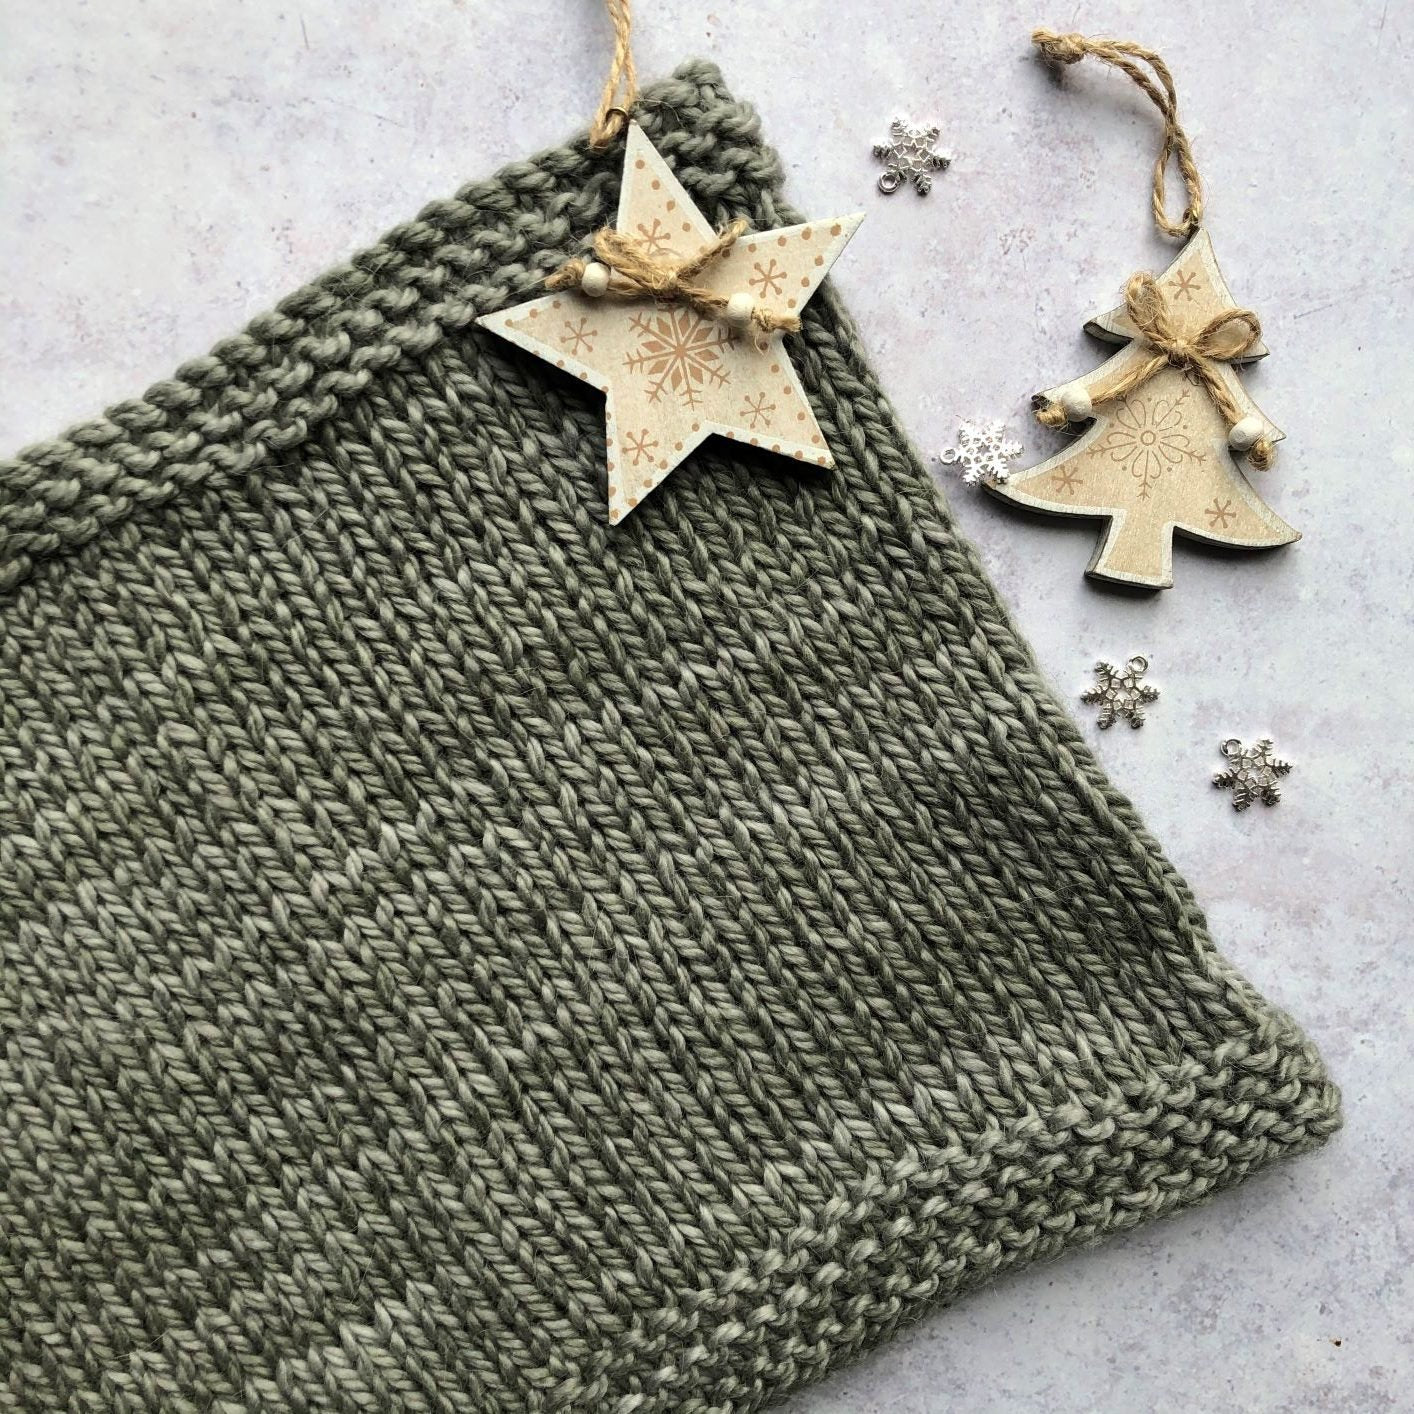 3 Gift Kits for Beginner Knitters - This is Knit